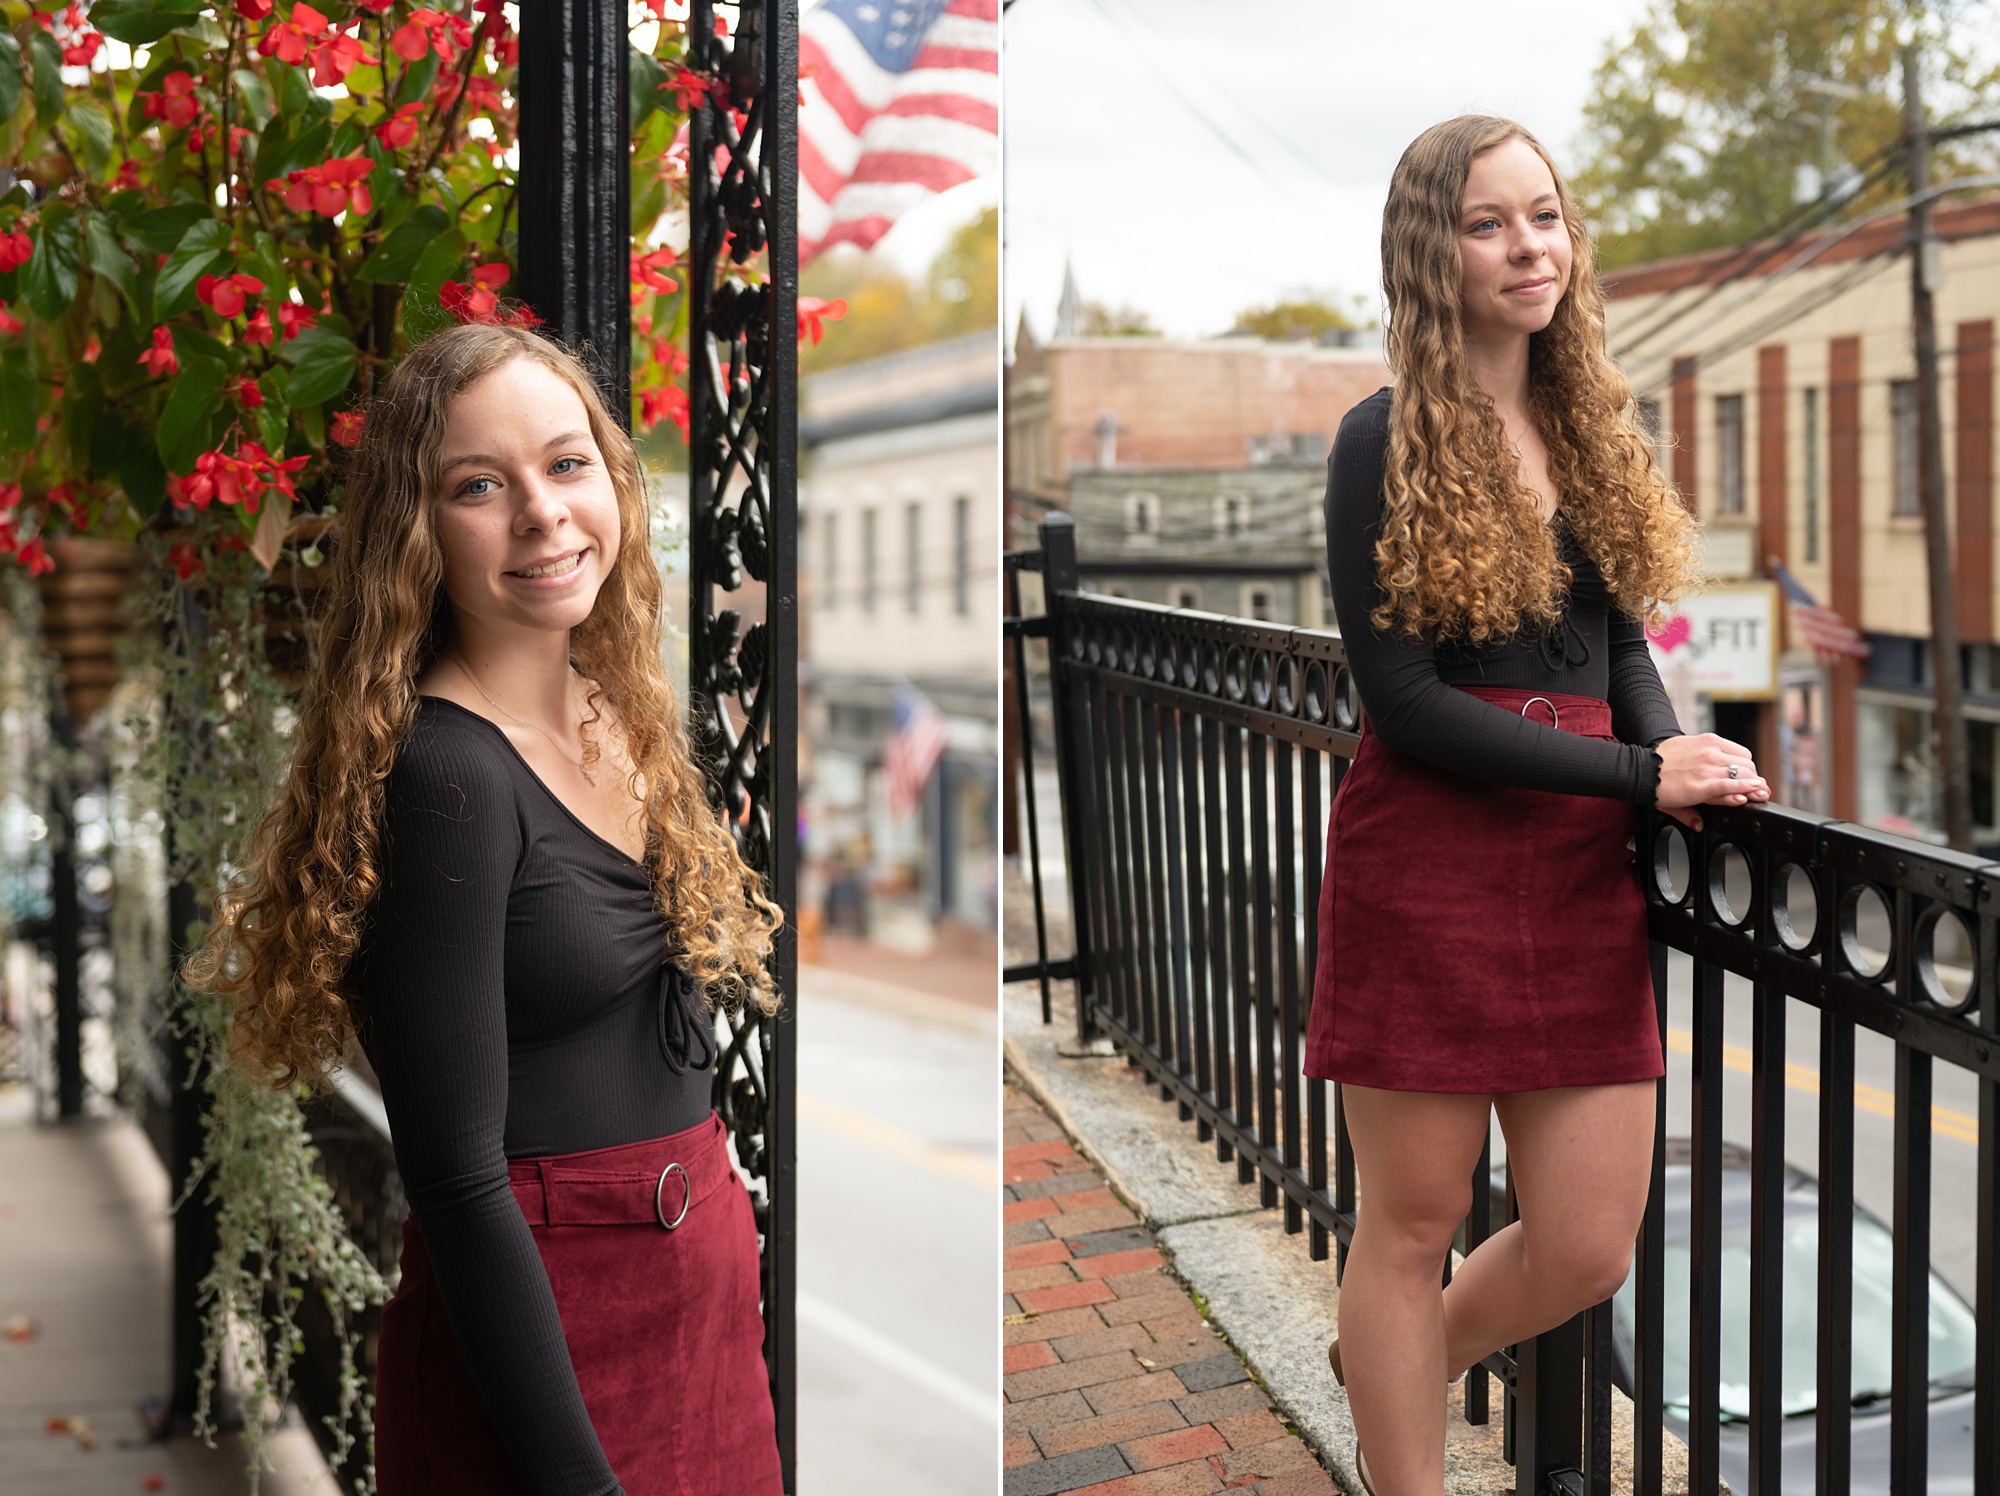 senior poses with wrought iron fence in Maryland